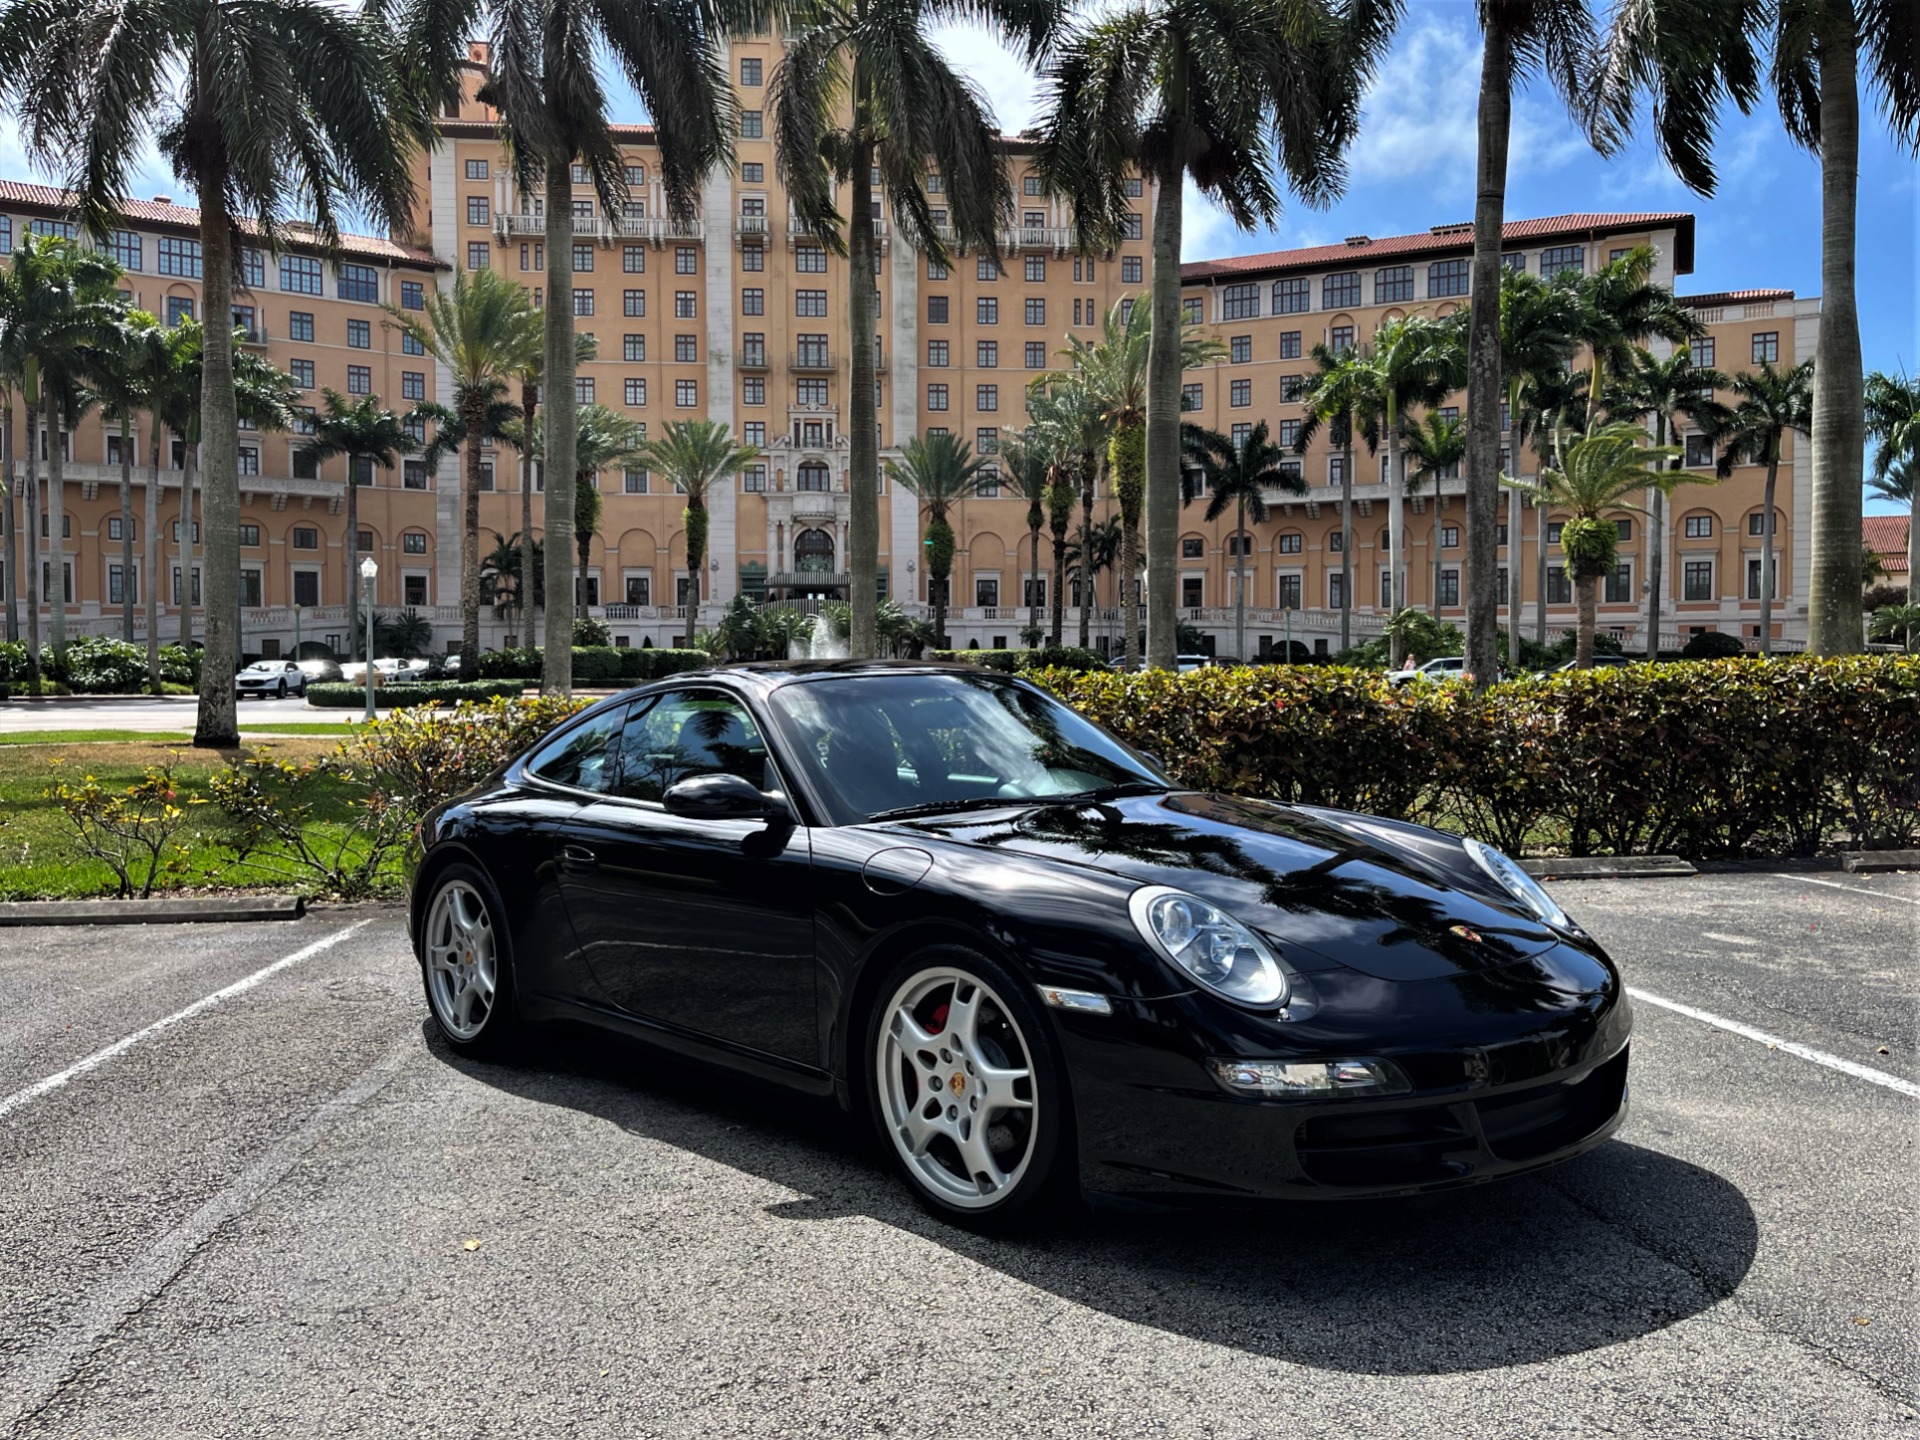 Used 2005 Porsche 911 Carrera S for sale Sold at The Gables Sports Cars in Miami FL 33146 1